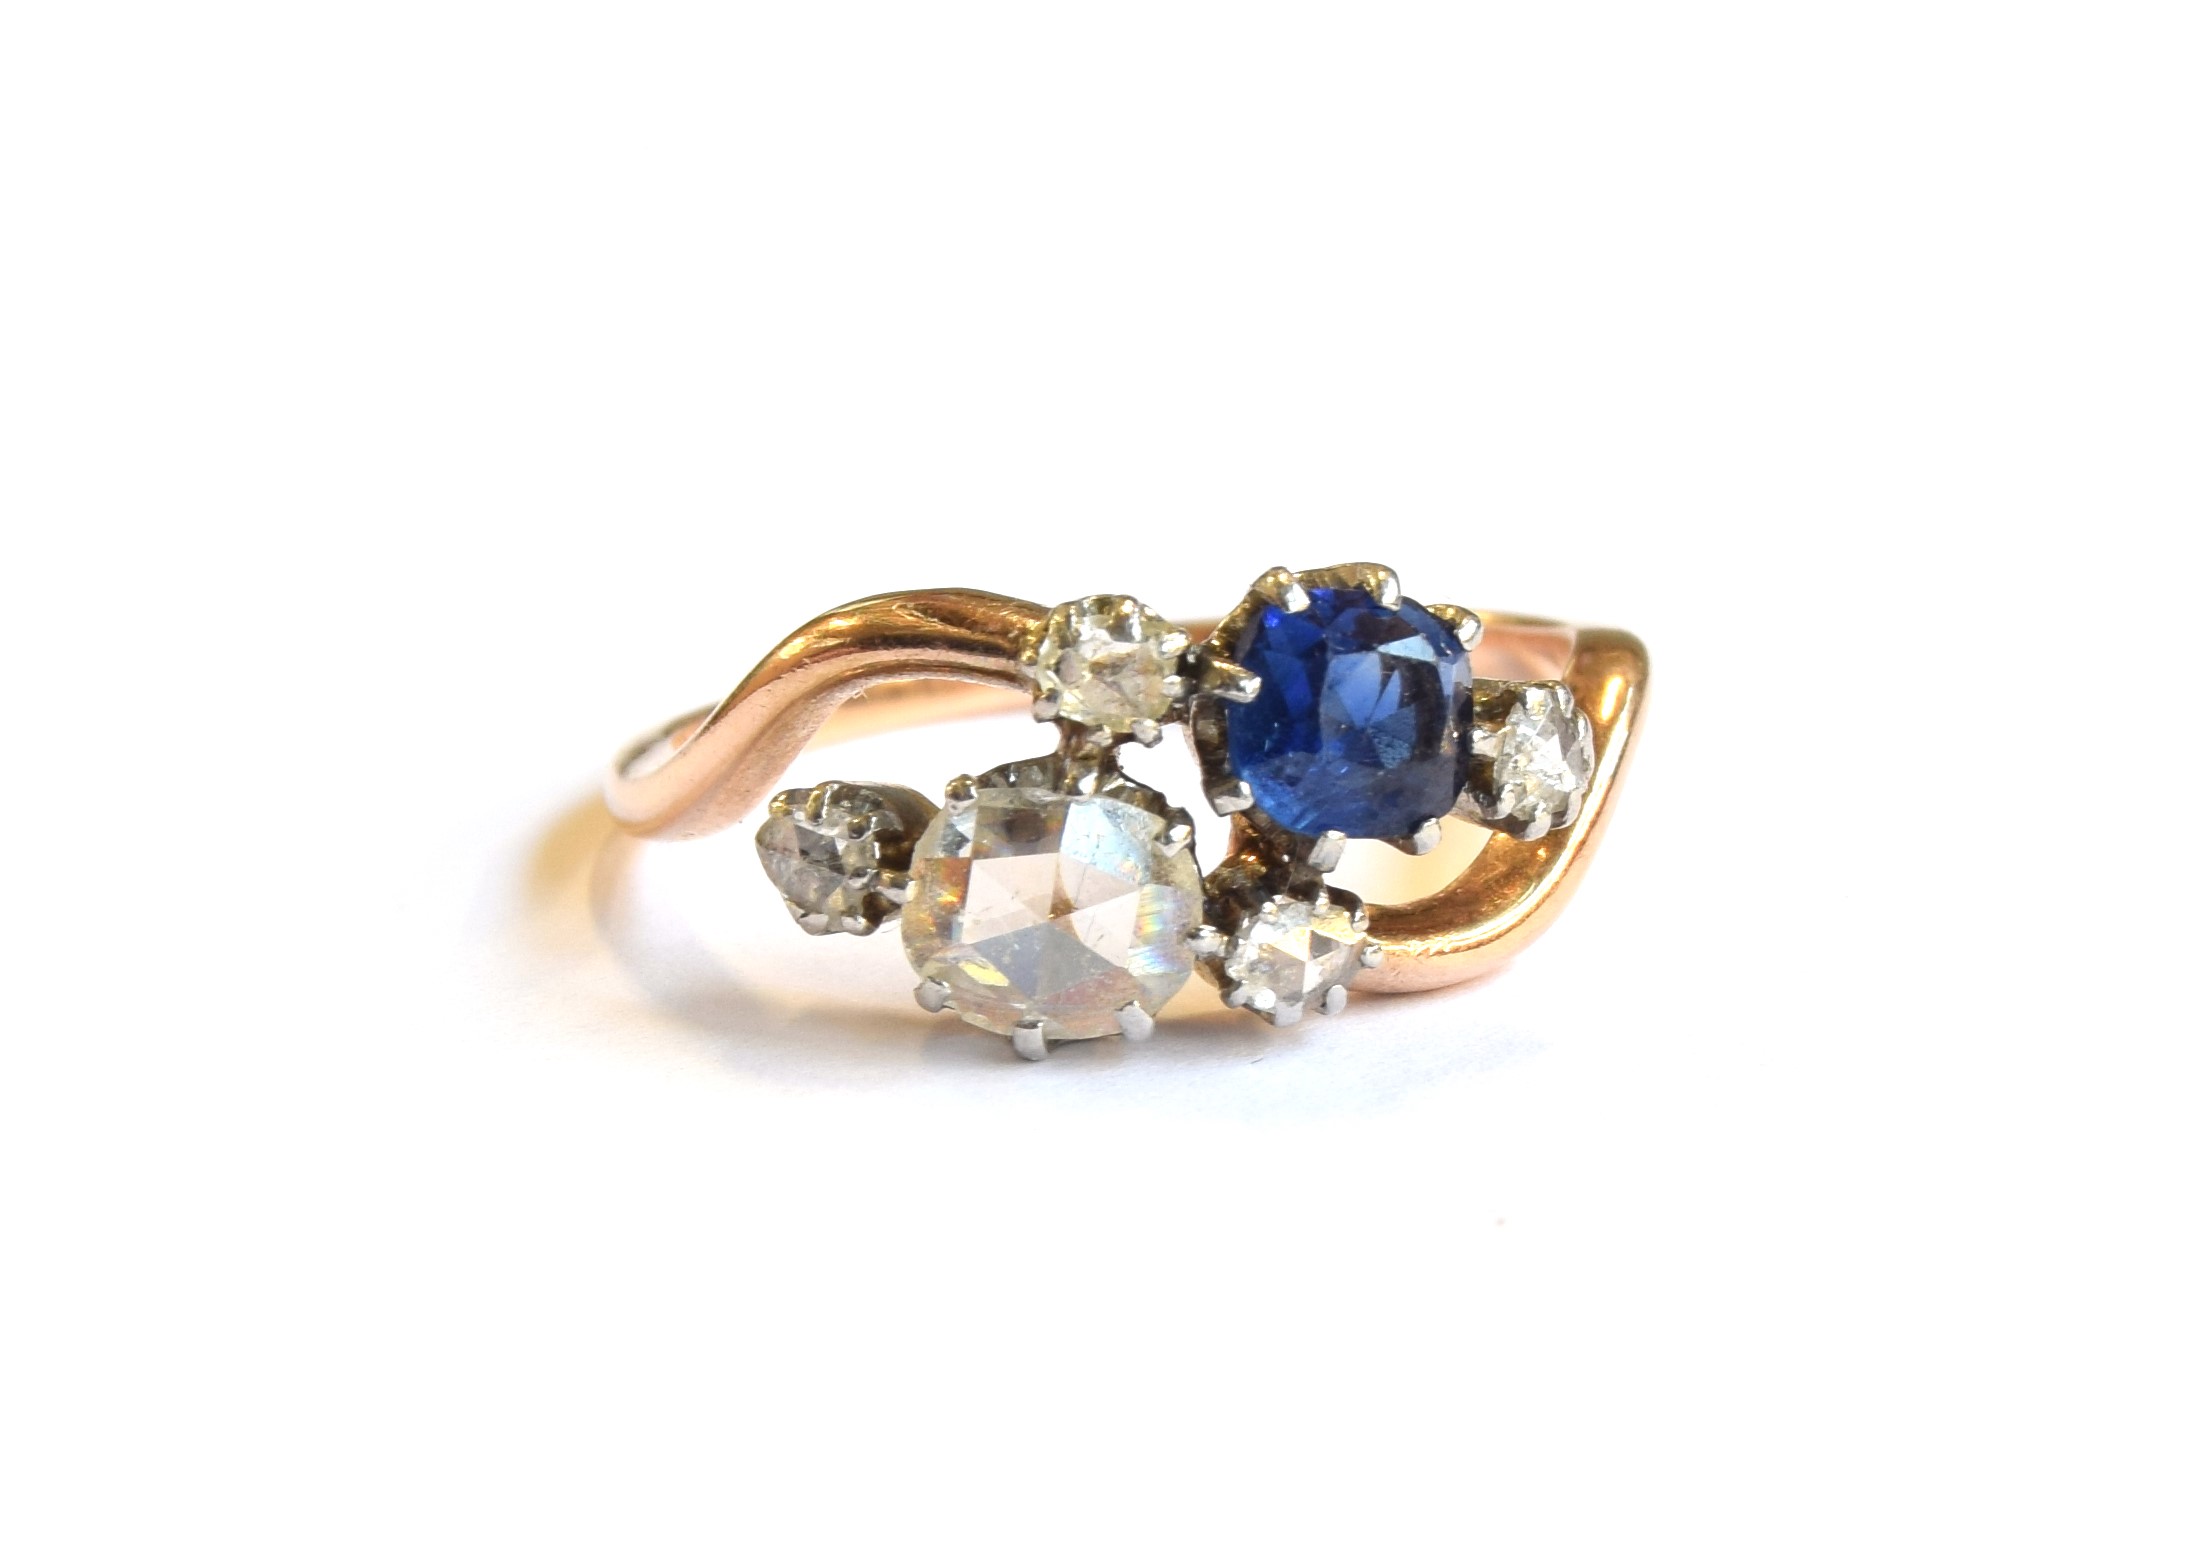 An early 20th century 18ct gold 'Toi et Moi' diamond and sapphire crossover ring, the large rose cut - Image 4 of 6